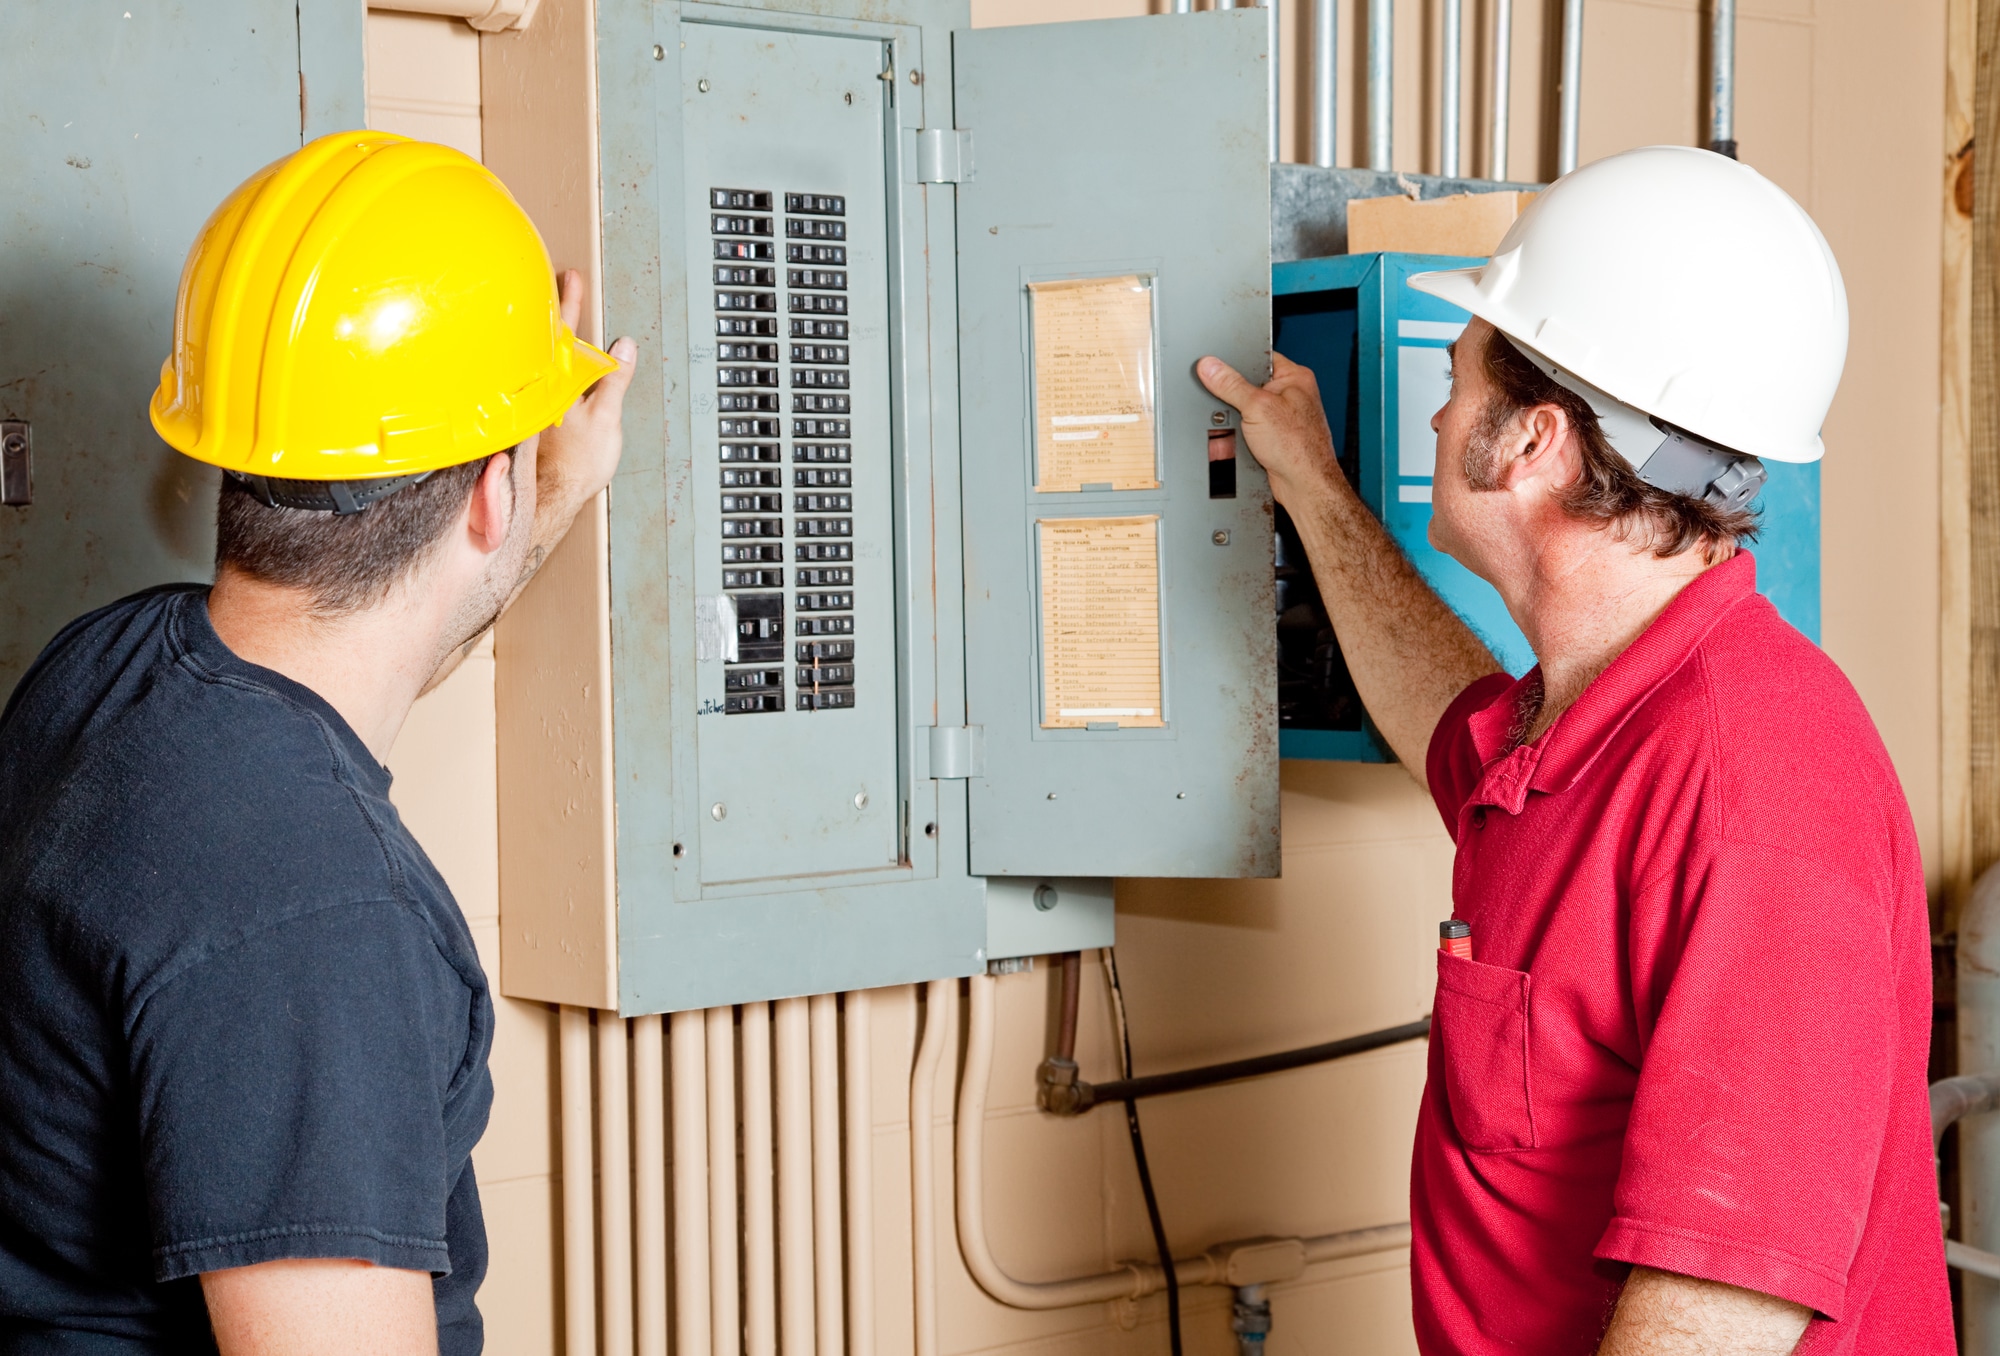 Electricians examining a circuit breaker panel in an industrial setting.